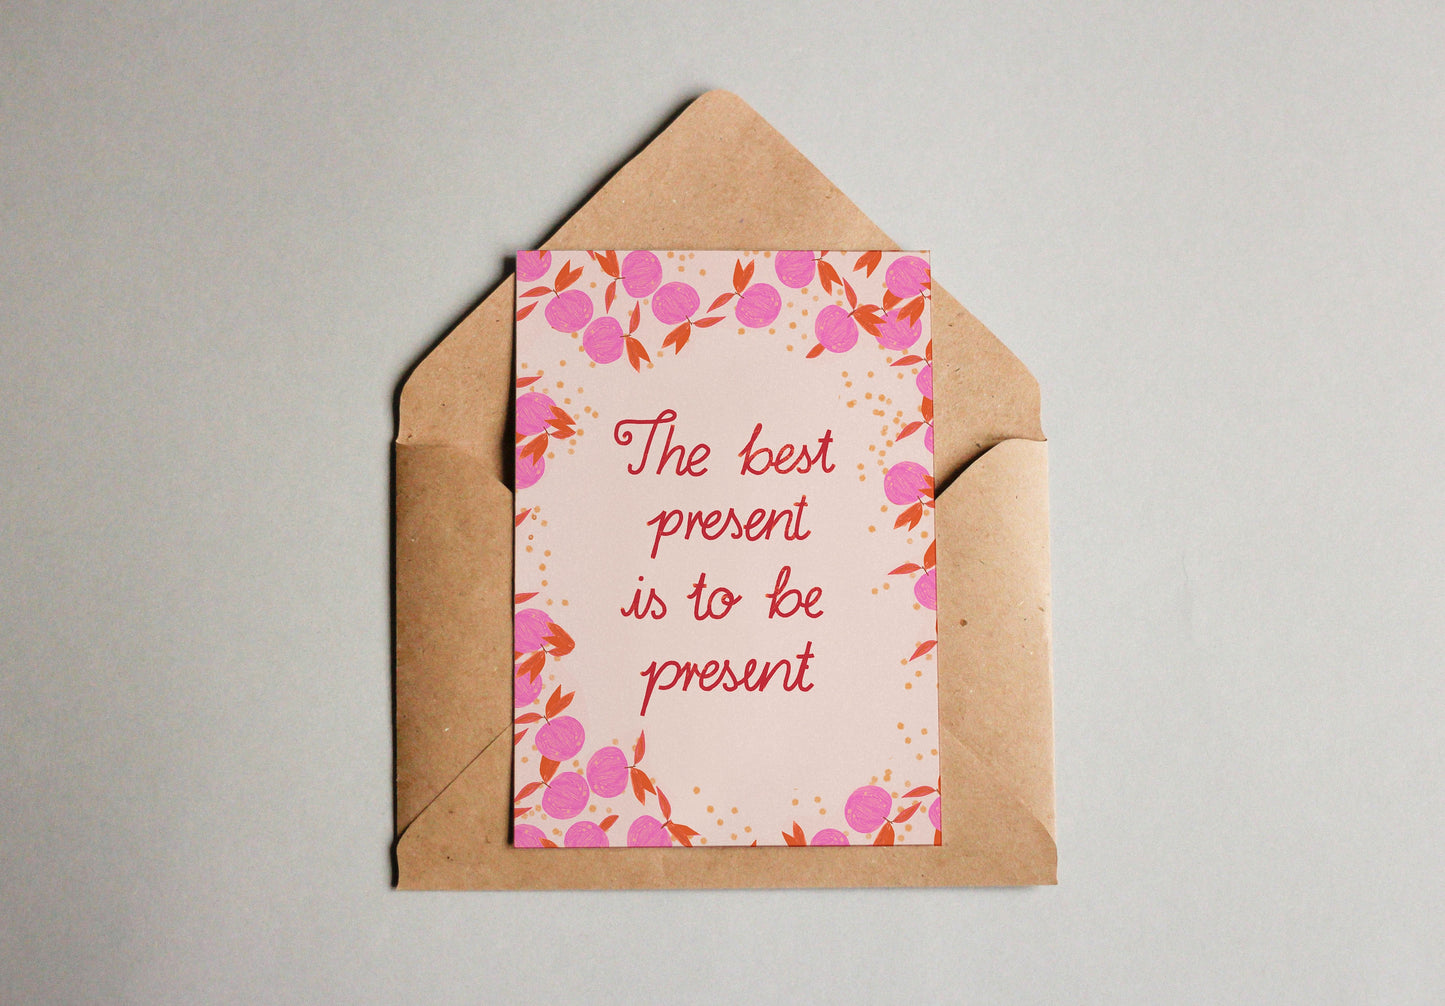 Postkarte "The best present is to be present" rosa